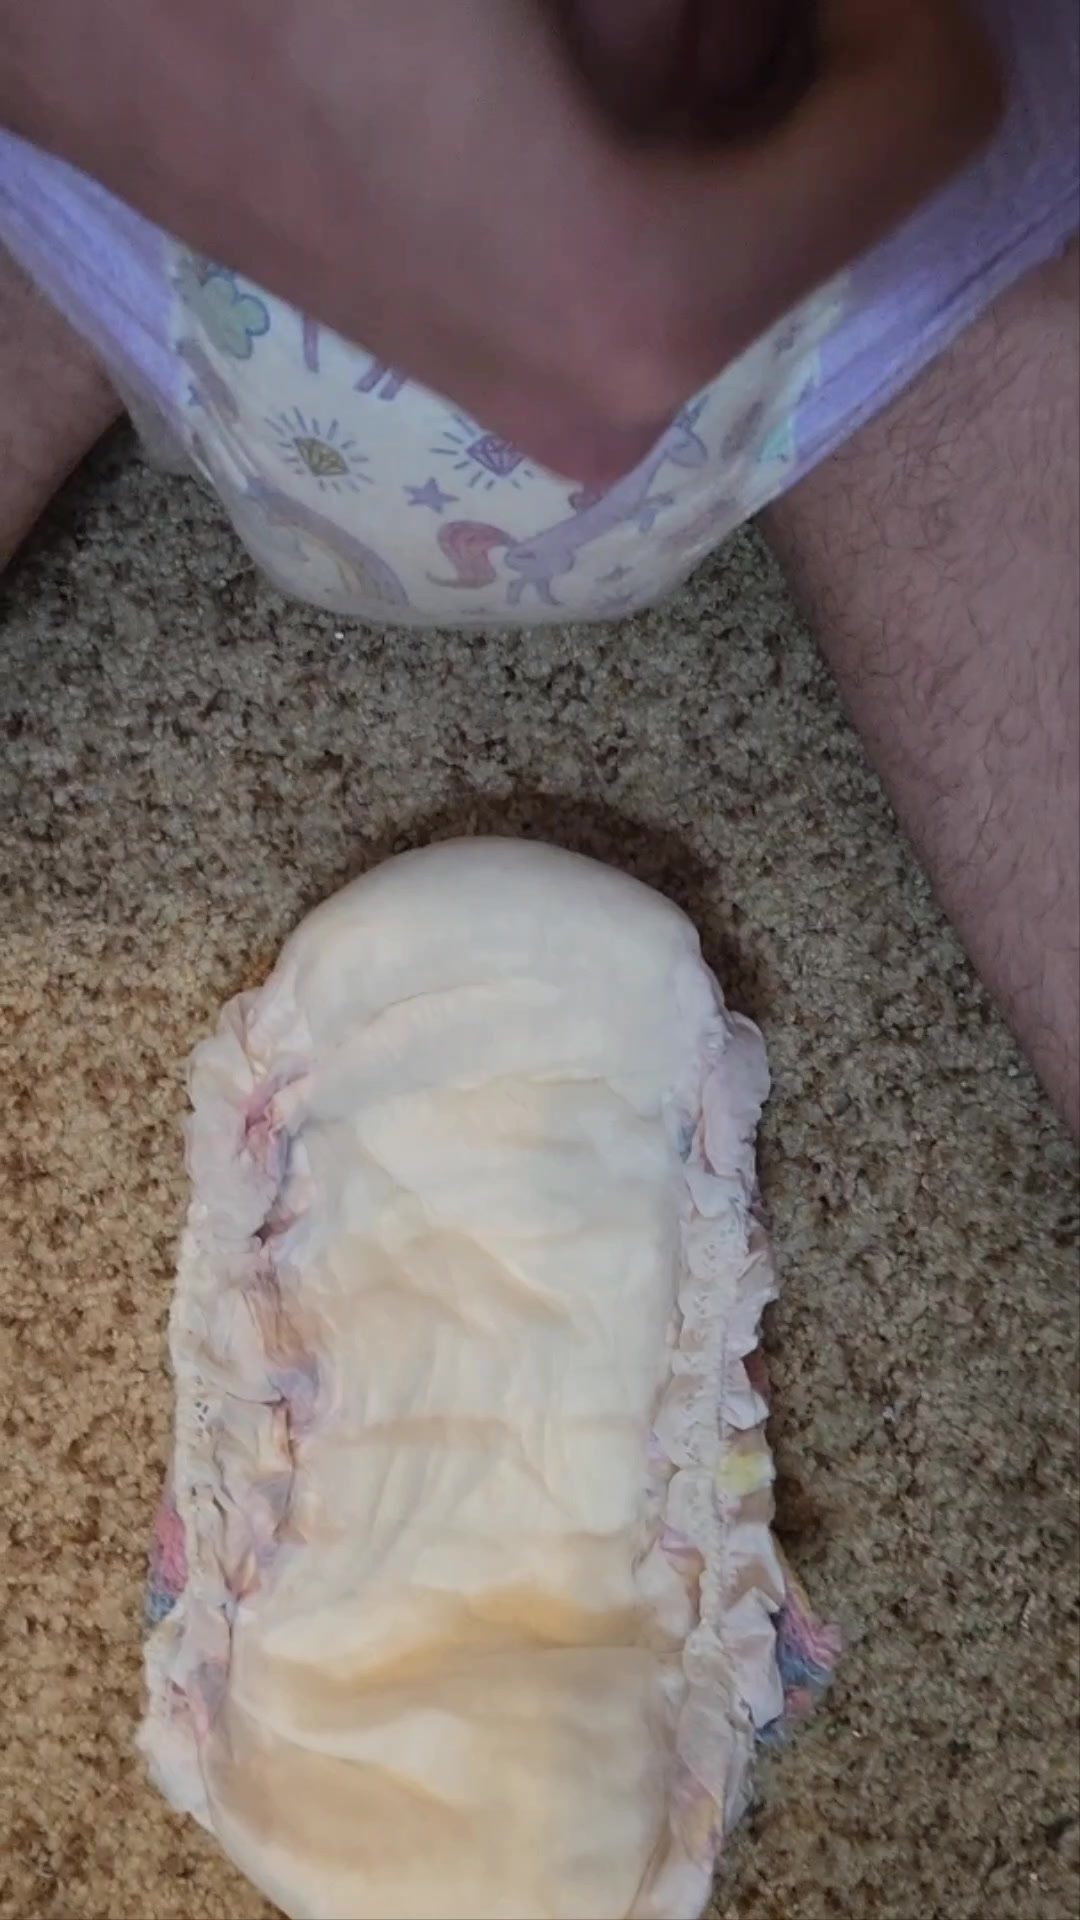 Cum on diaper for later